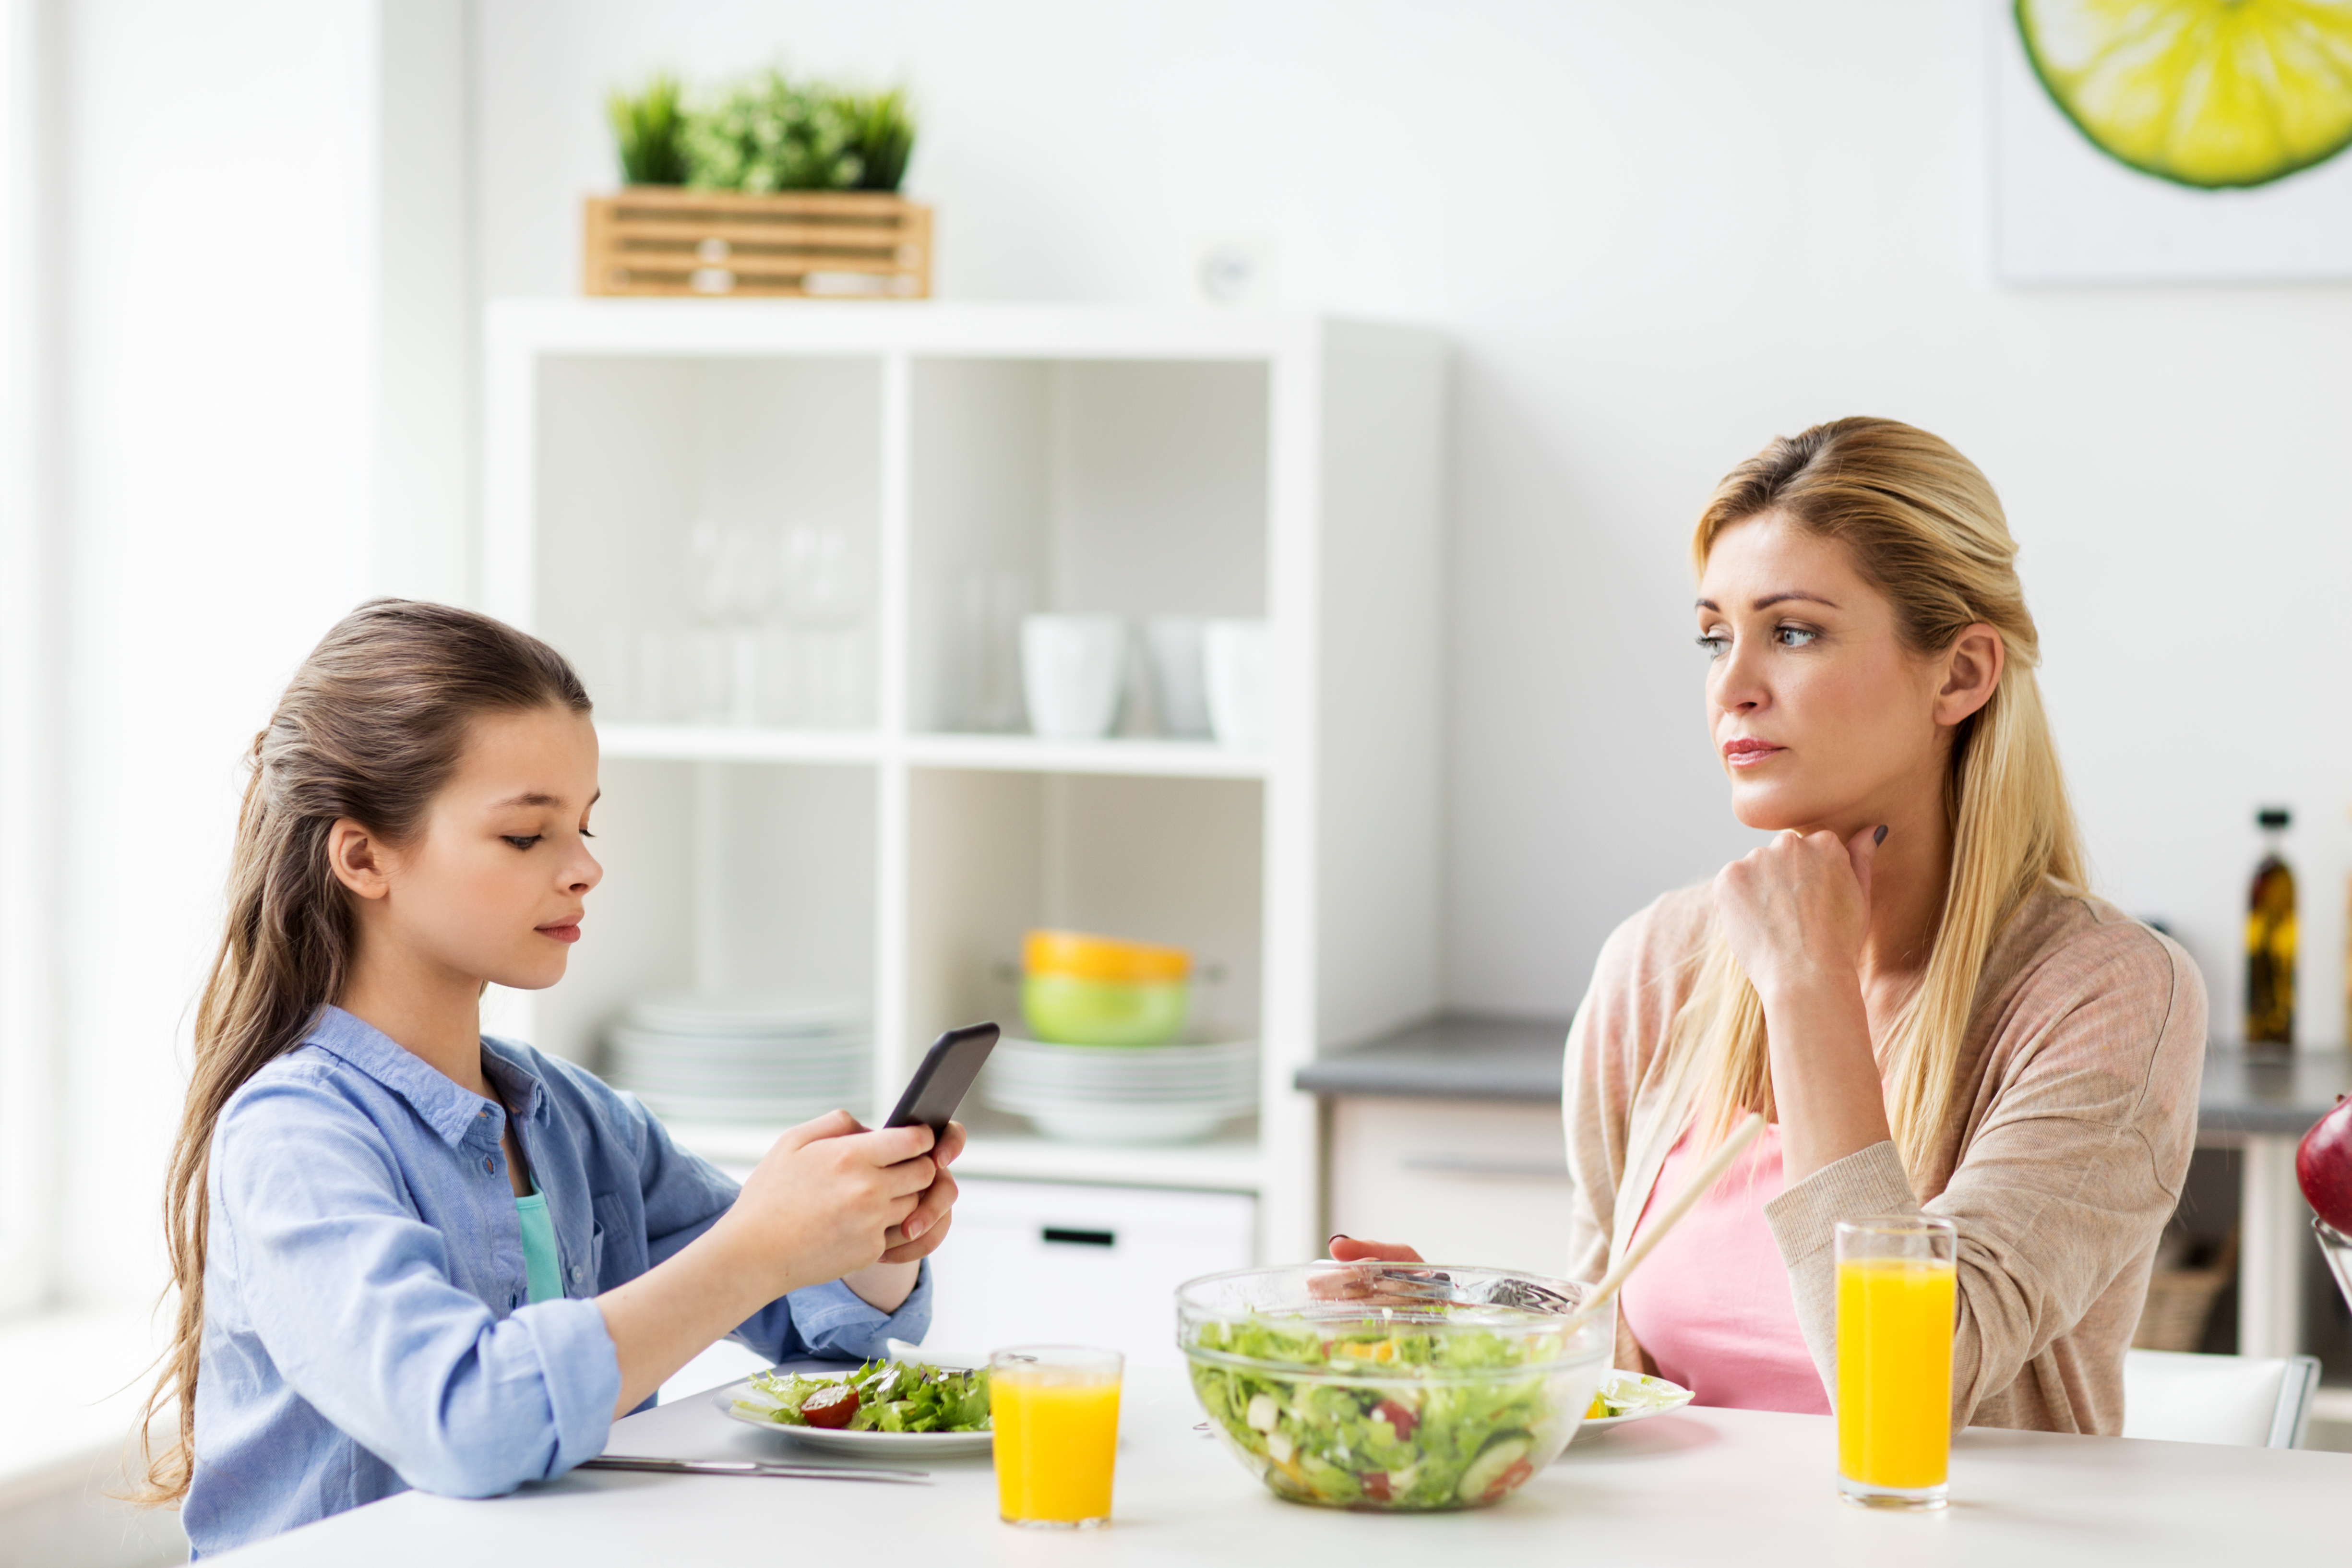 A sad woman and a young girl at the dining table | Source: Shutterstock